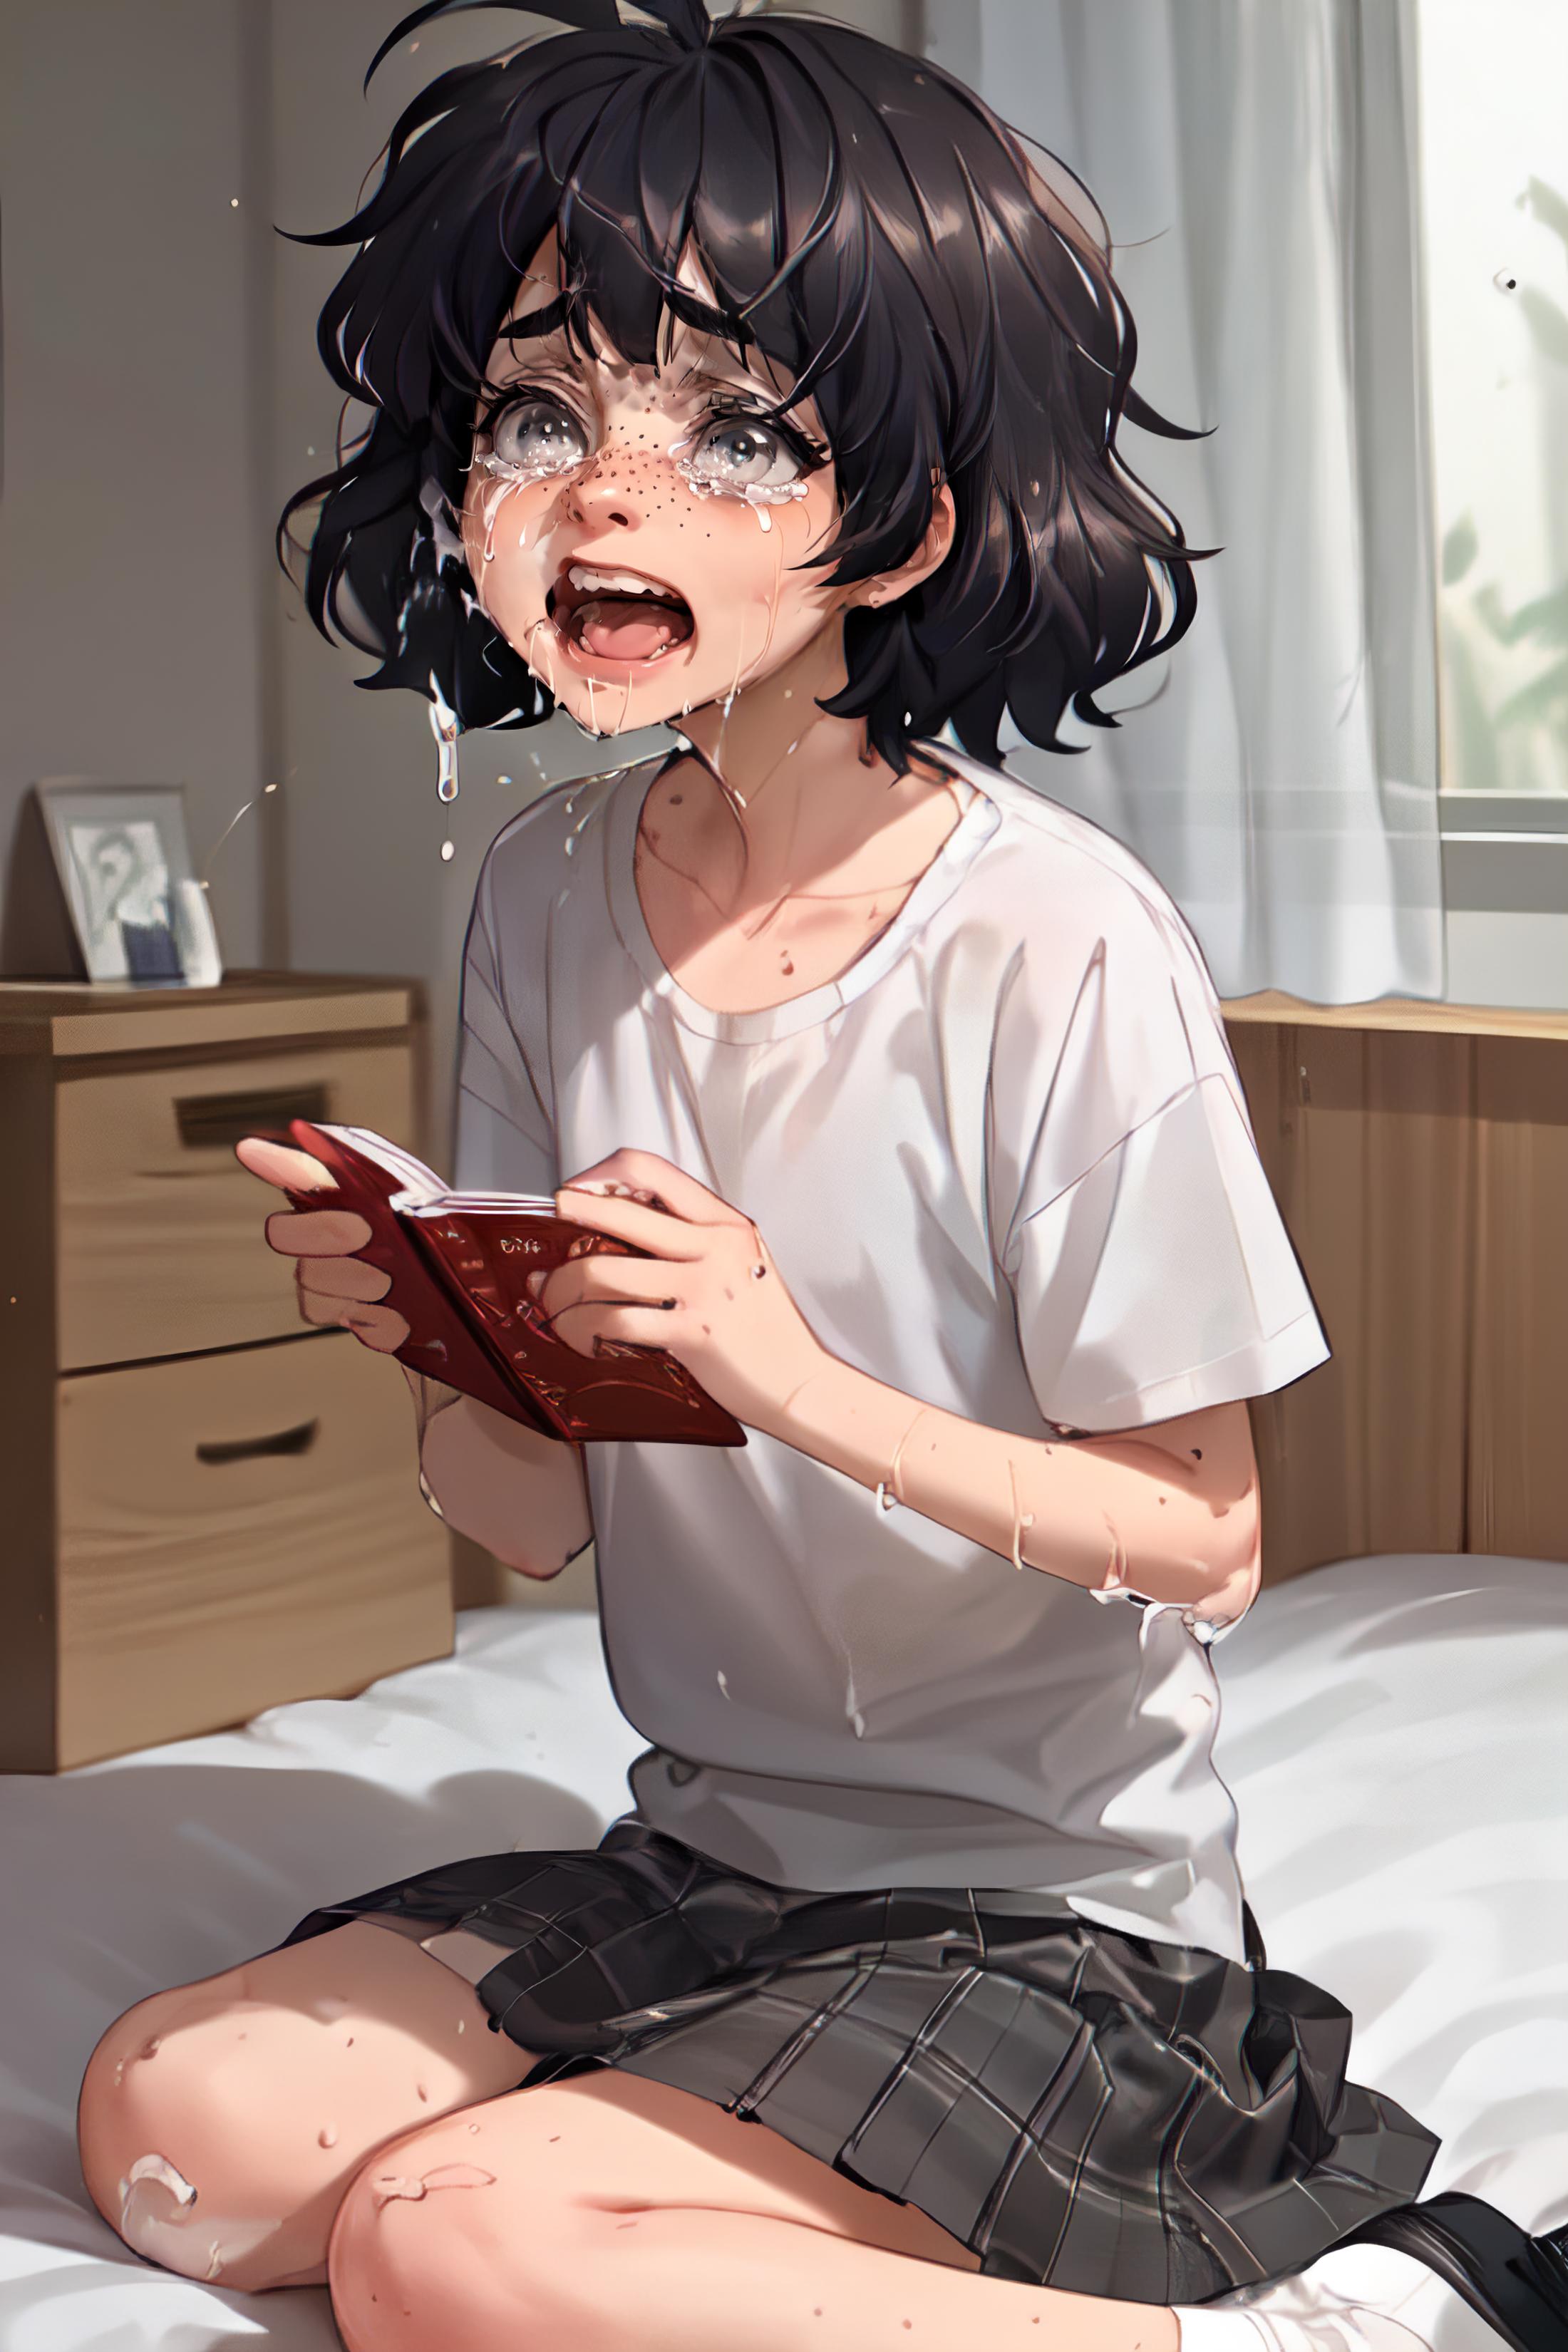 open mouth pain screaming shouting angry expressions | 灵魂大叫 怒吼 尖叫 痛苦 image by FriskTemmie